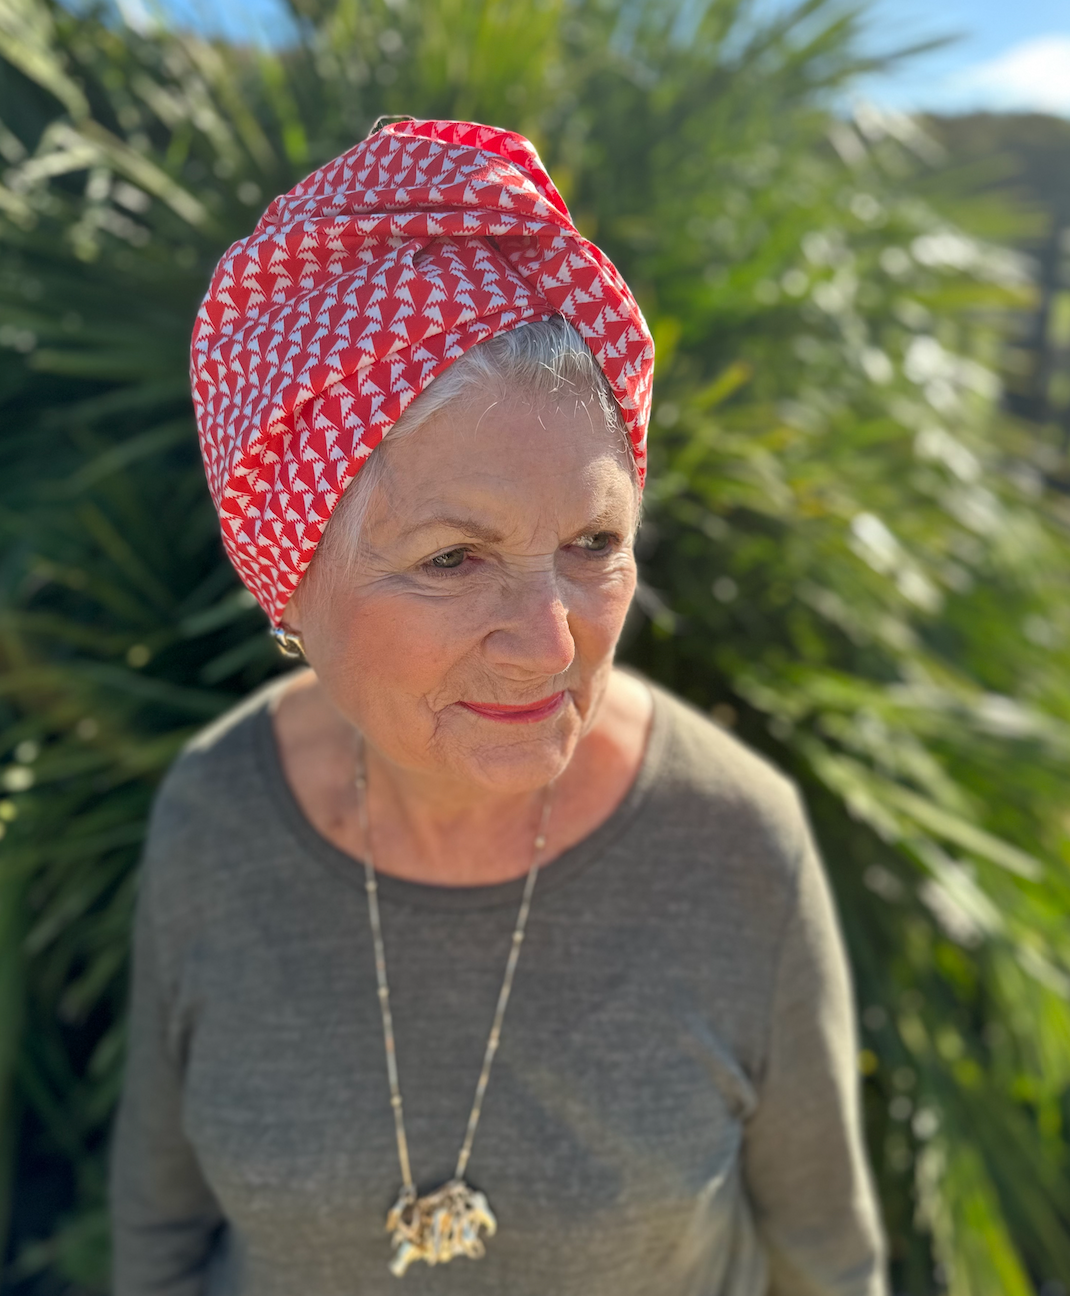 Little Susan Turban Hat - Red and White Jonathan print by Liberty of London